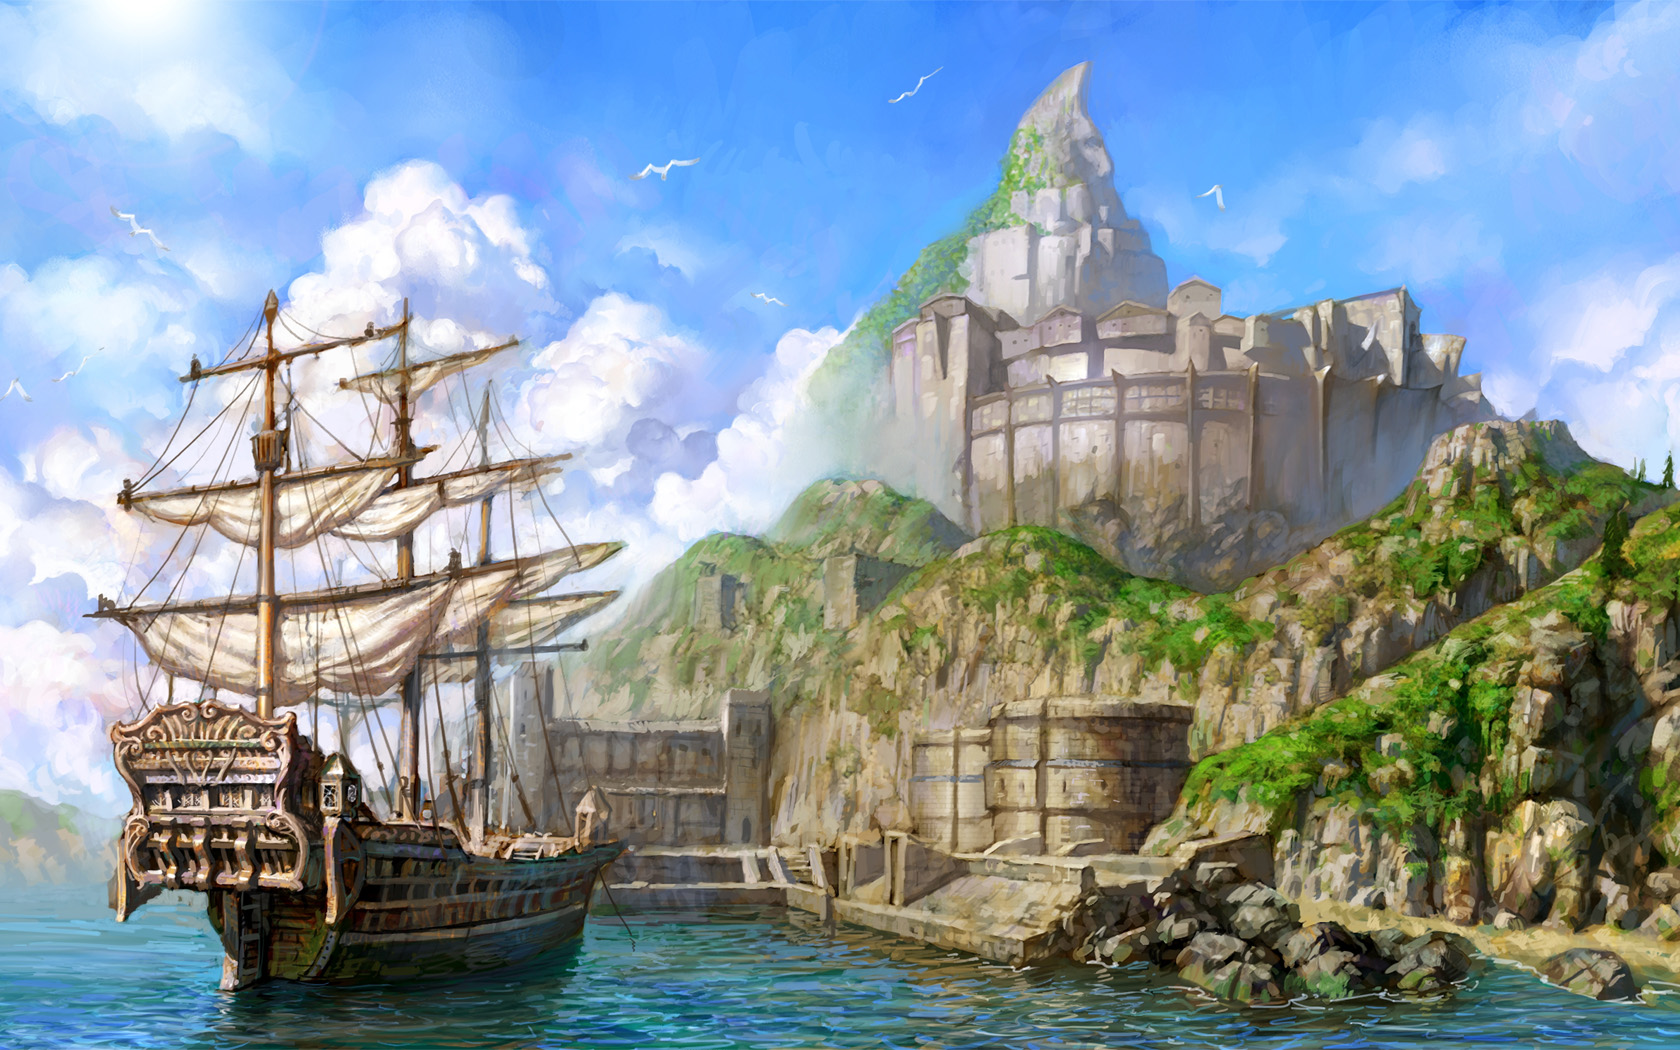 A ship sails towards a fortress on an island, surrounded by a scenic landscape.